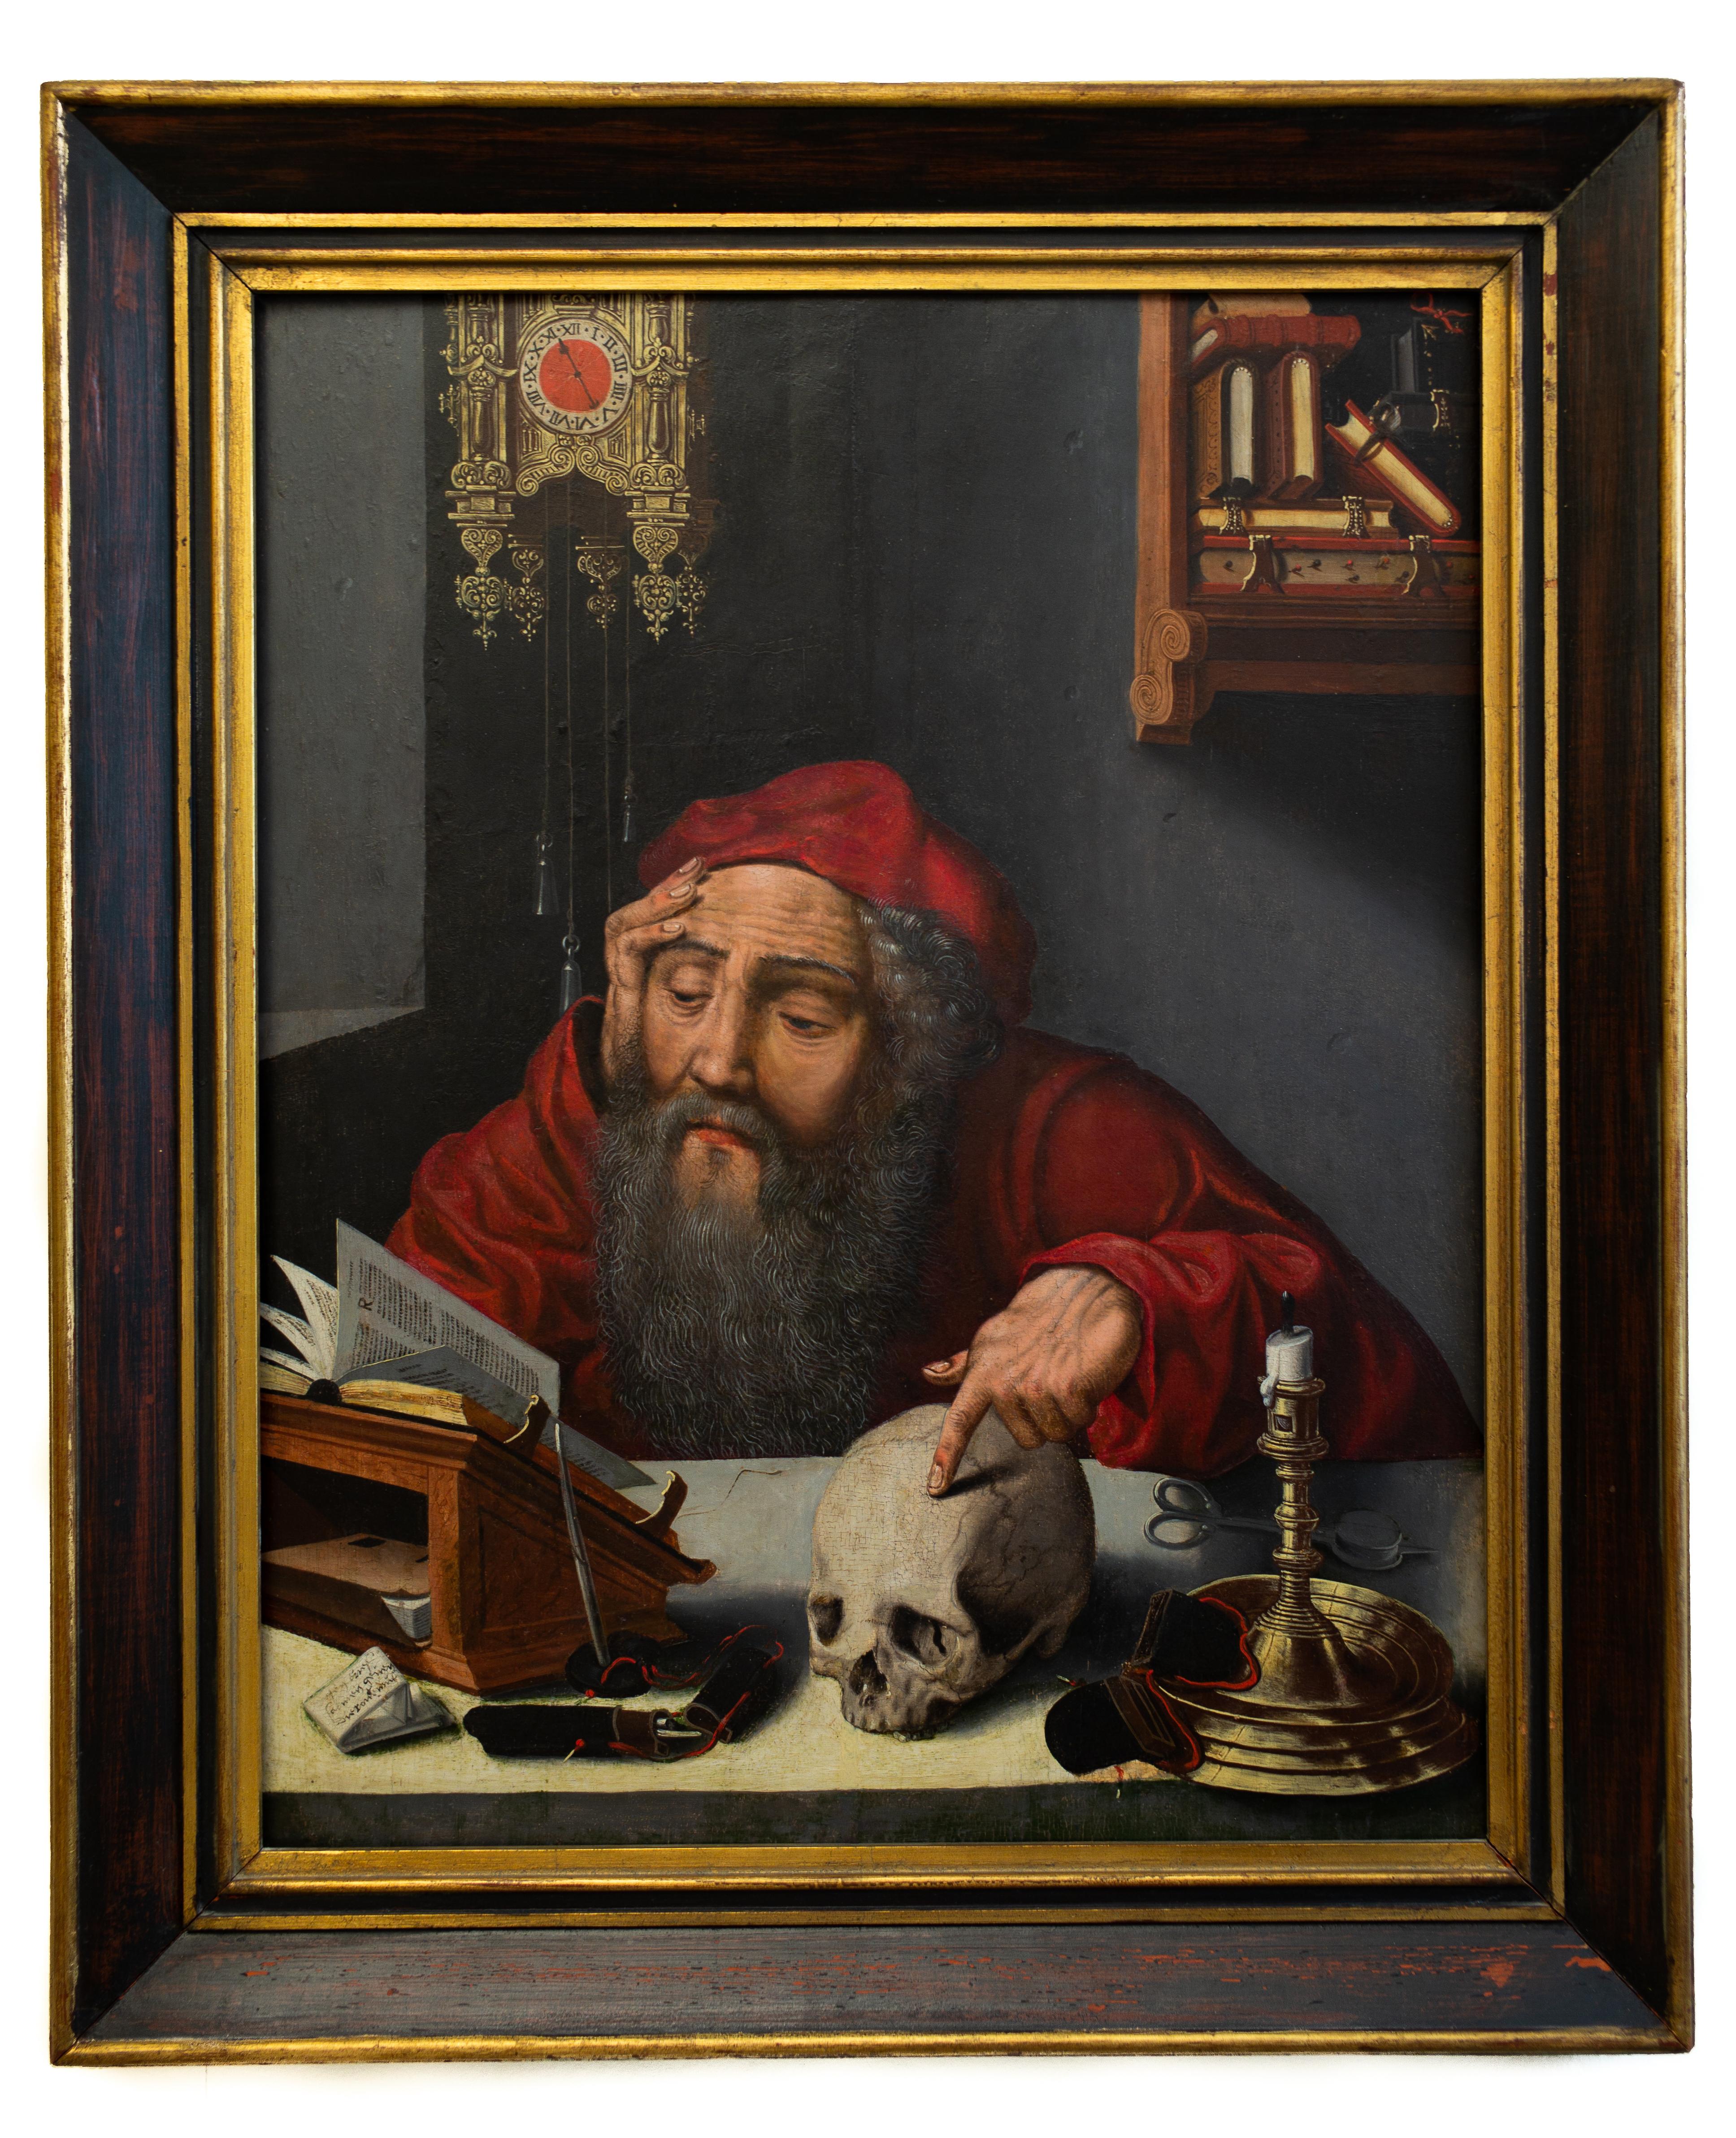 Unknown Figurative Painting - Saint Jerome in His Study, Painted by a Follower of Joos van Cleve, Oil on Panel